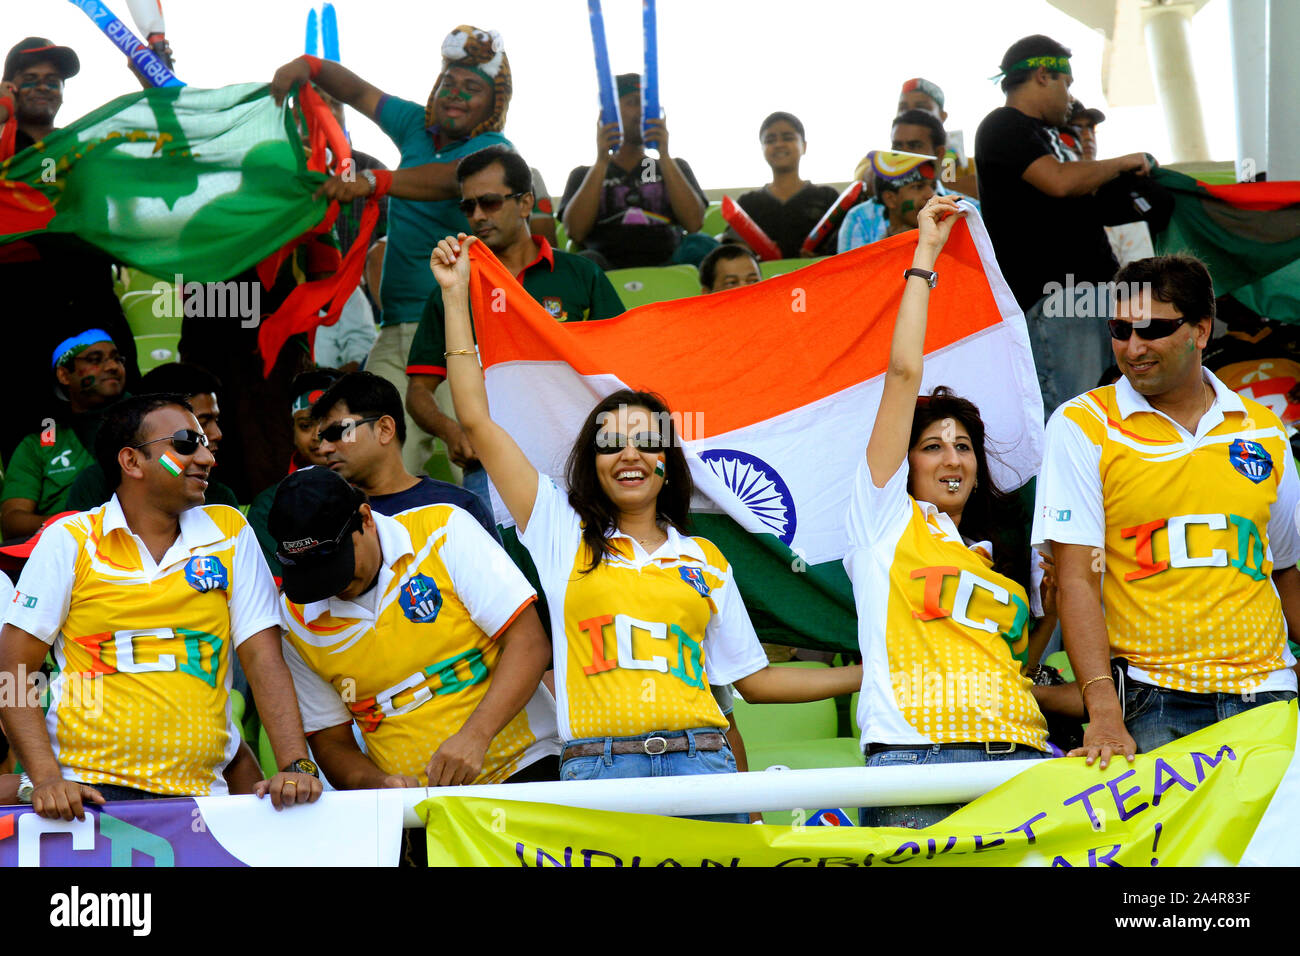 Indian supporters wave their country’s flag during the opening match of the 10th ICC Cricket World Cup, in Sher-e-Bangla National Stadium, on 19th February, 2011.  Mirpur, Dhaka, Bangladesh. Stock Photo